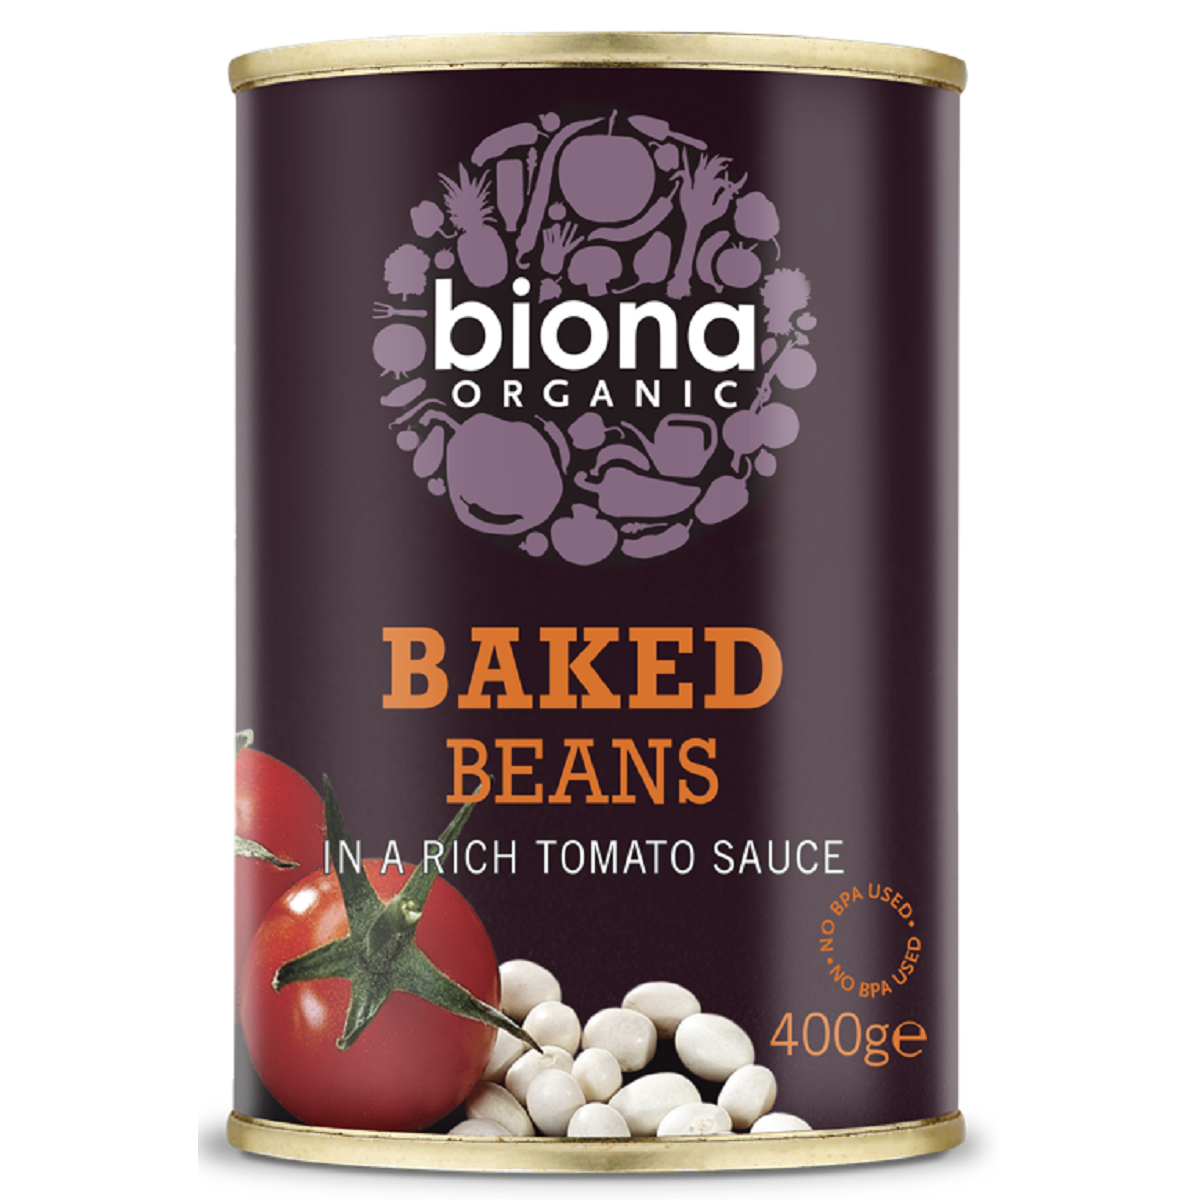 Biona Organic Baked Beans in Tomato Sauce 400g